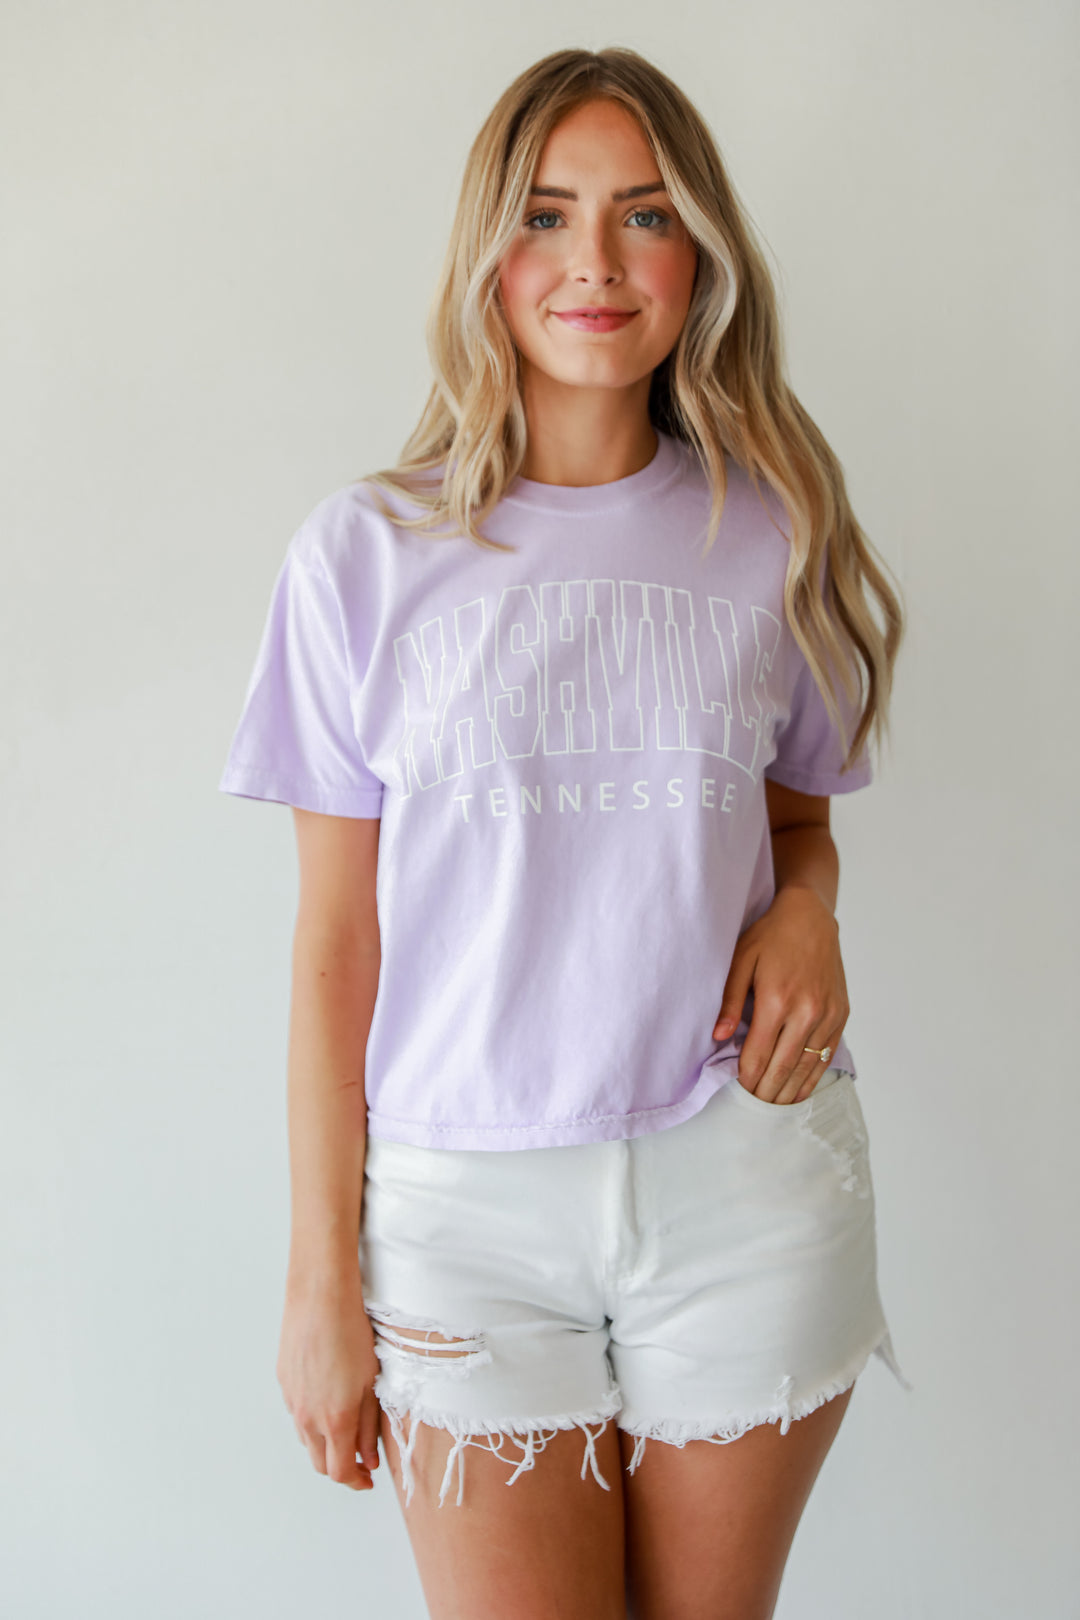 Lavender Nashville Tennessee Cropped Tee front view